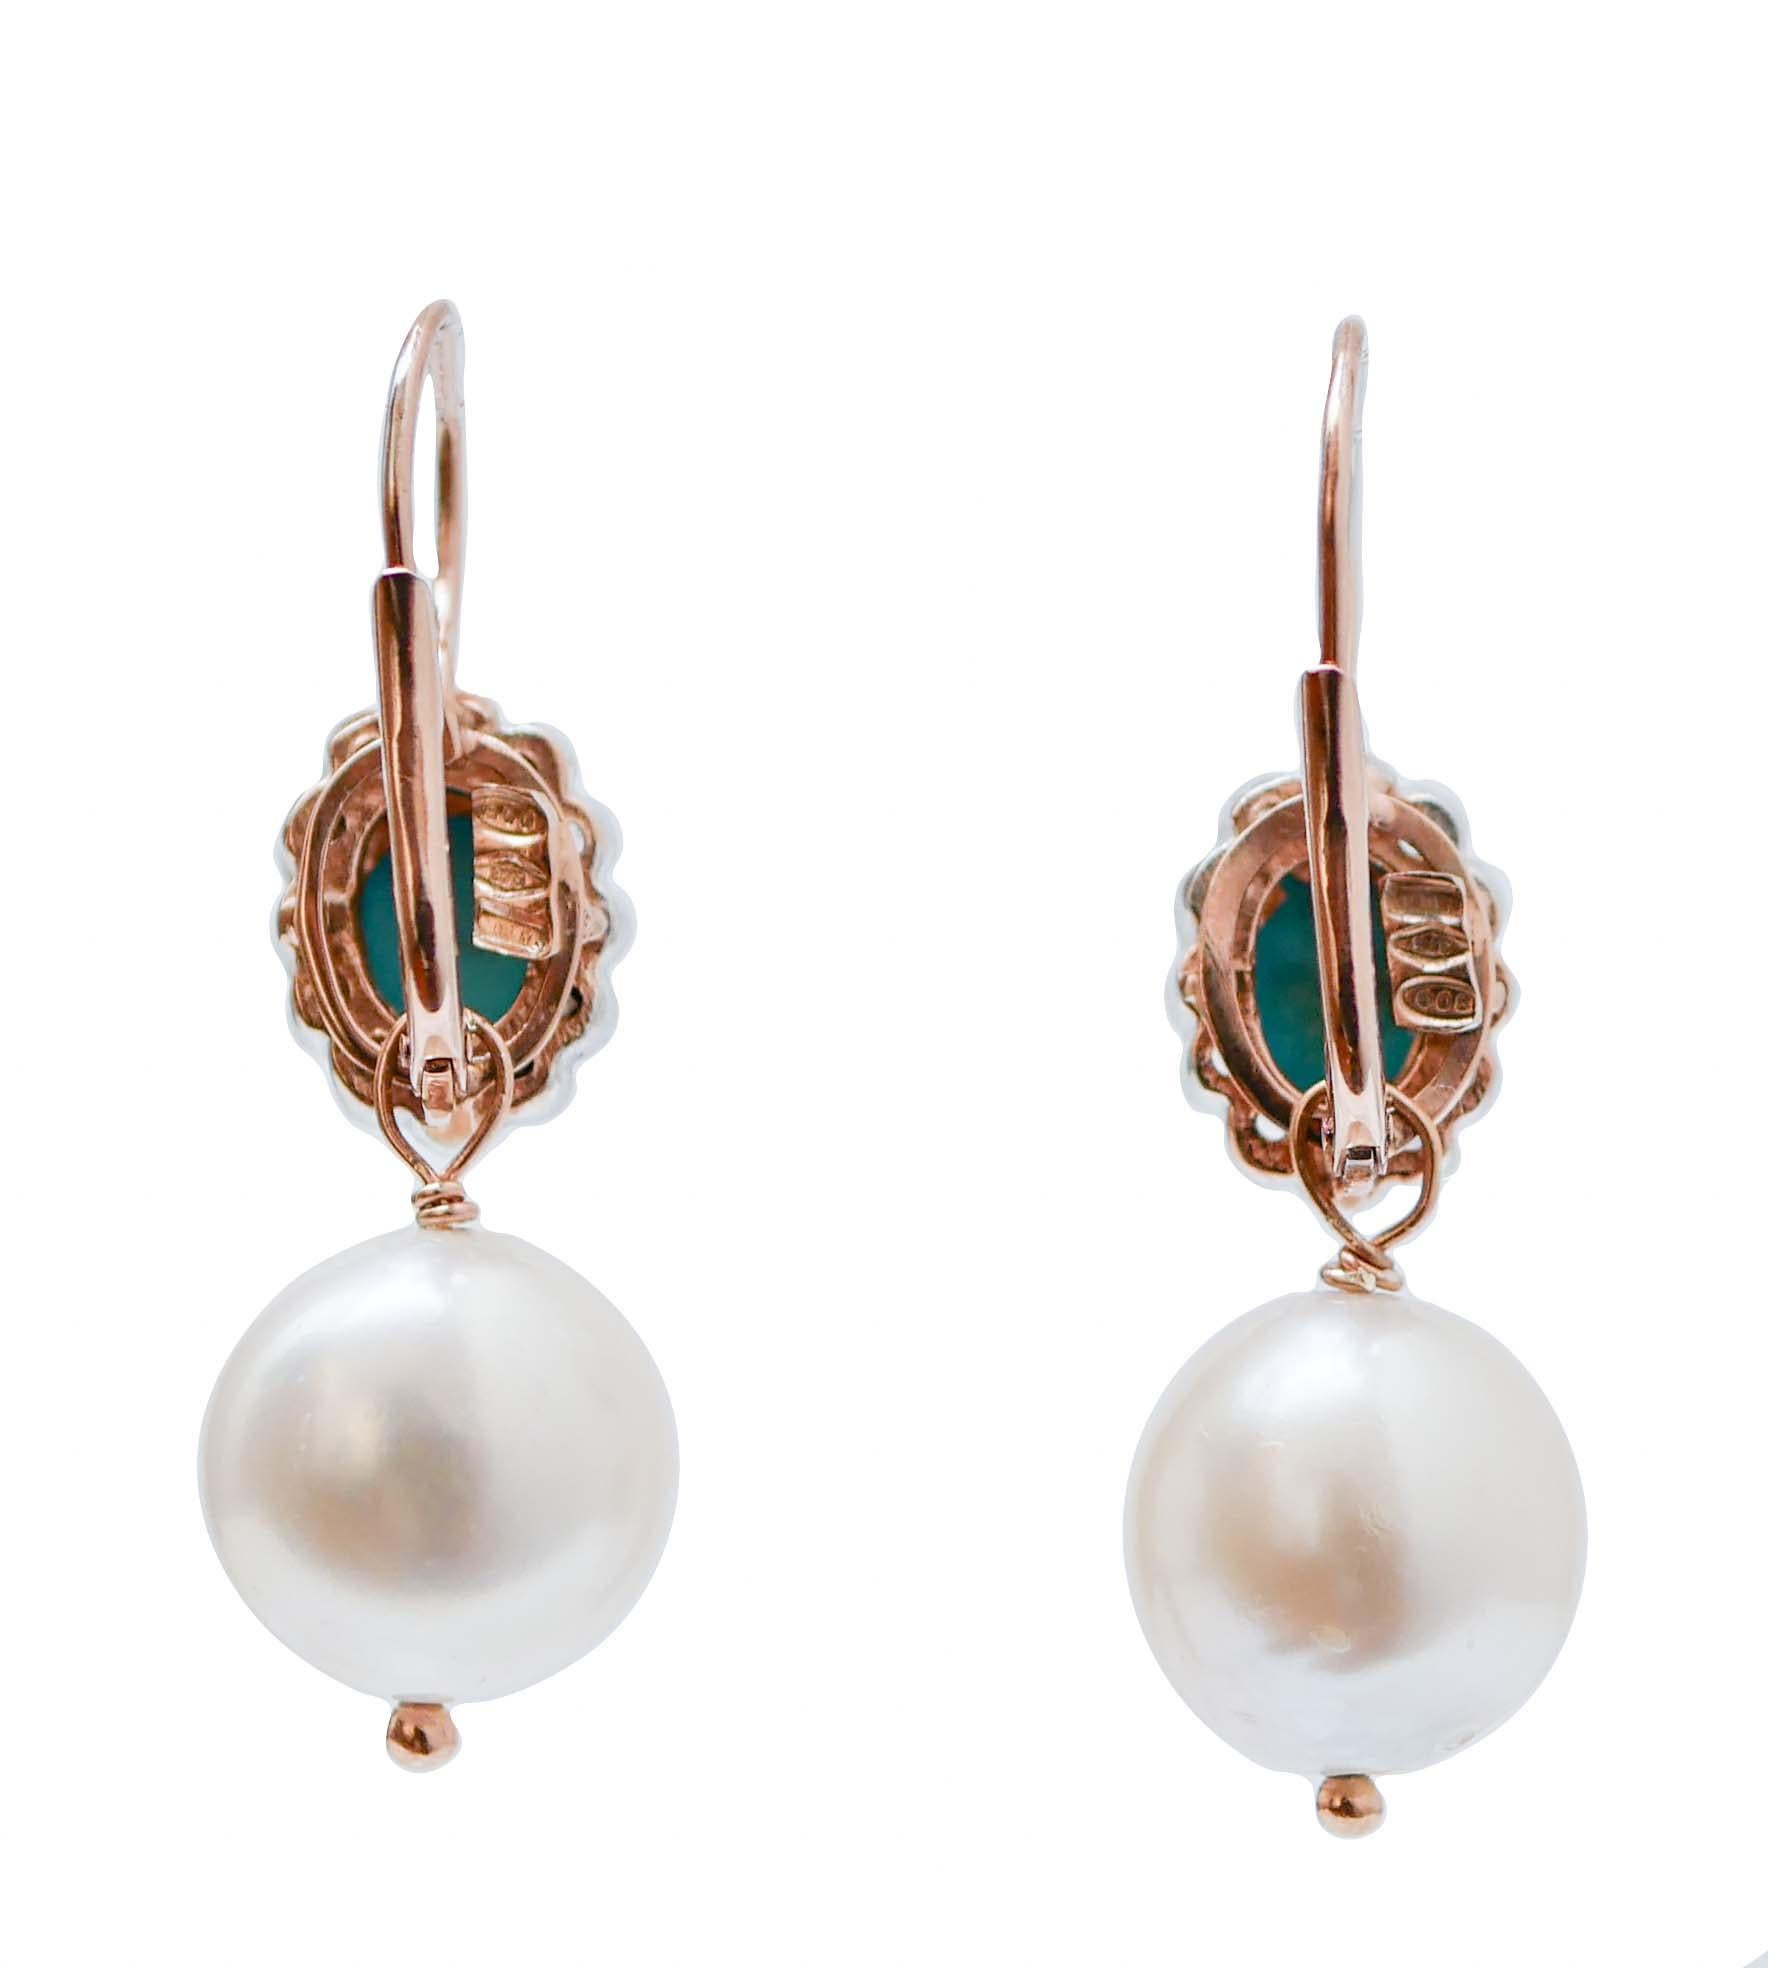 Retro White Pearls, Turquoise, Diamonds, Rose Gold and Silver Dangle Earrings. For Sale